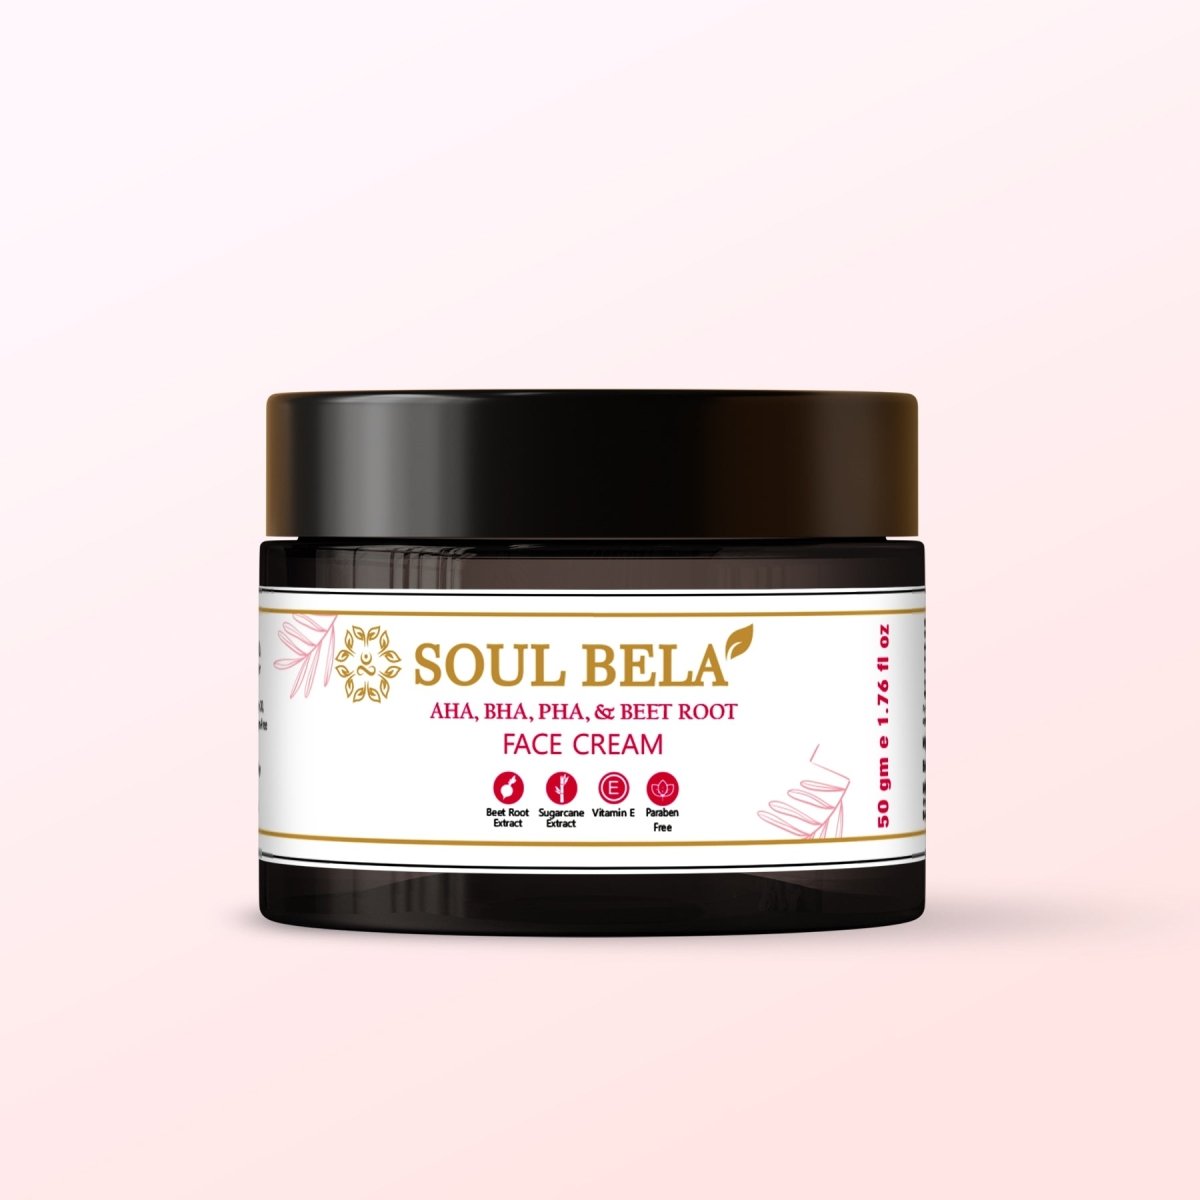 Soul Bela Beetroot Face Cream with AHA, BHA and PHA (50g) - Kreate- Moisturizers & Lotions